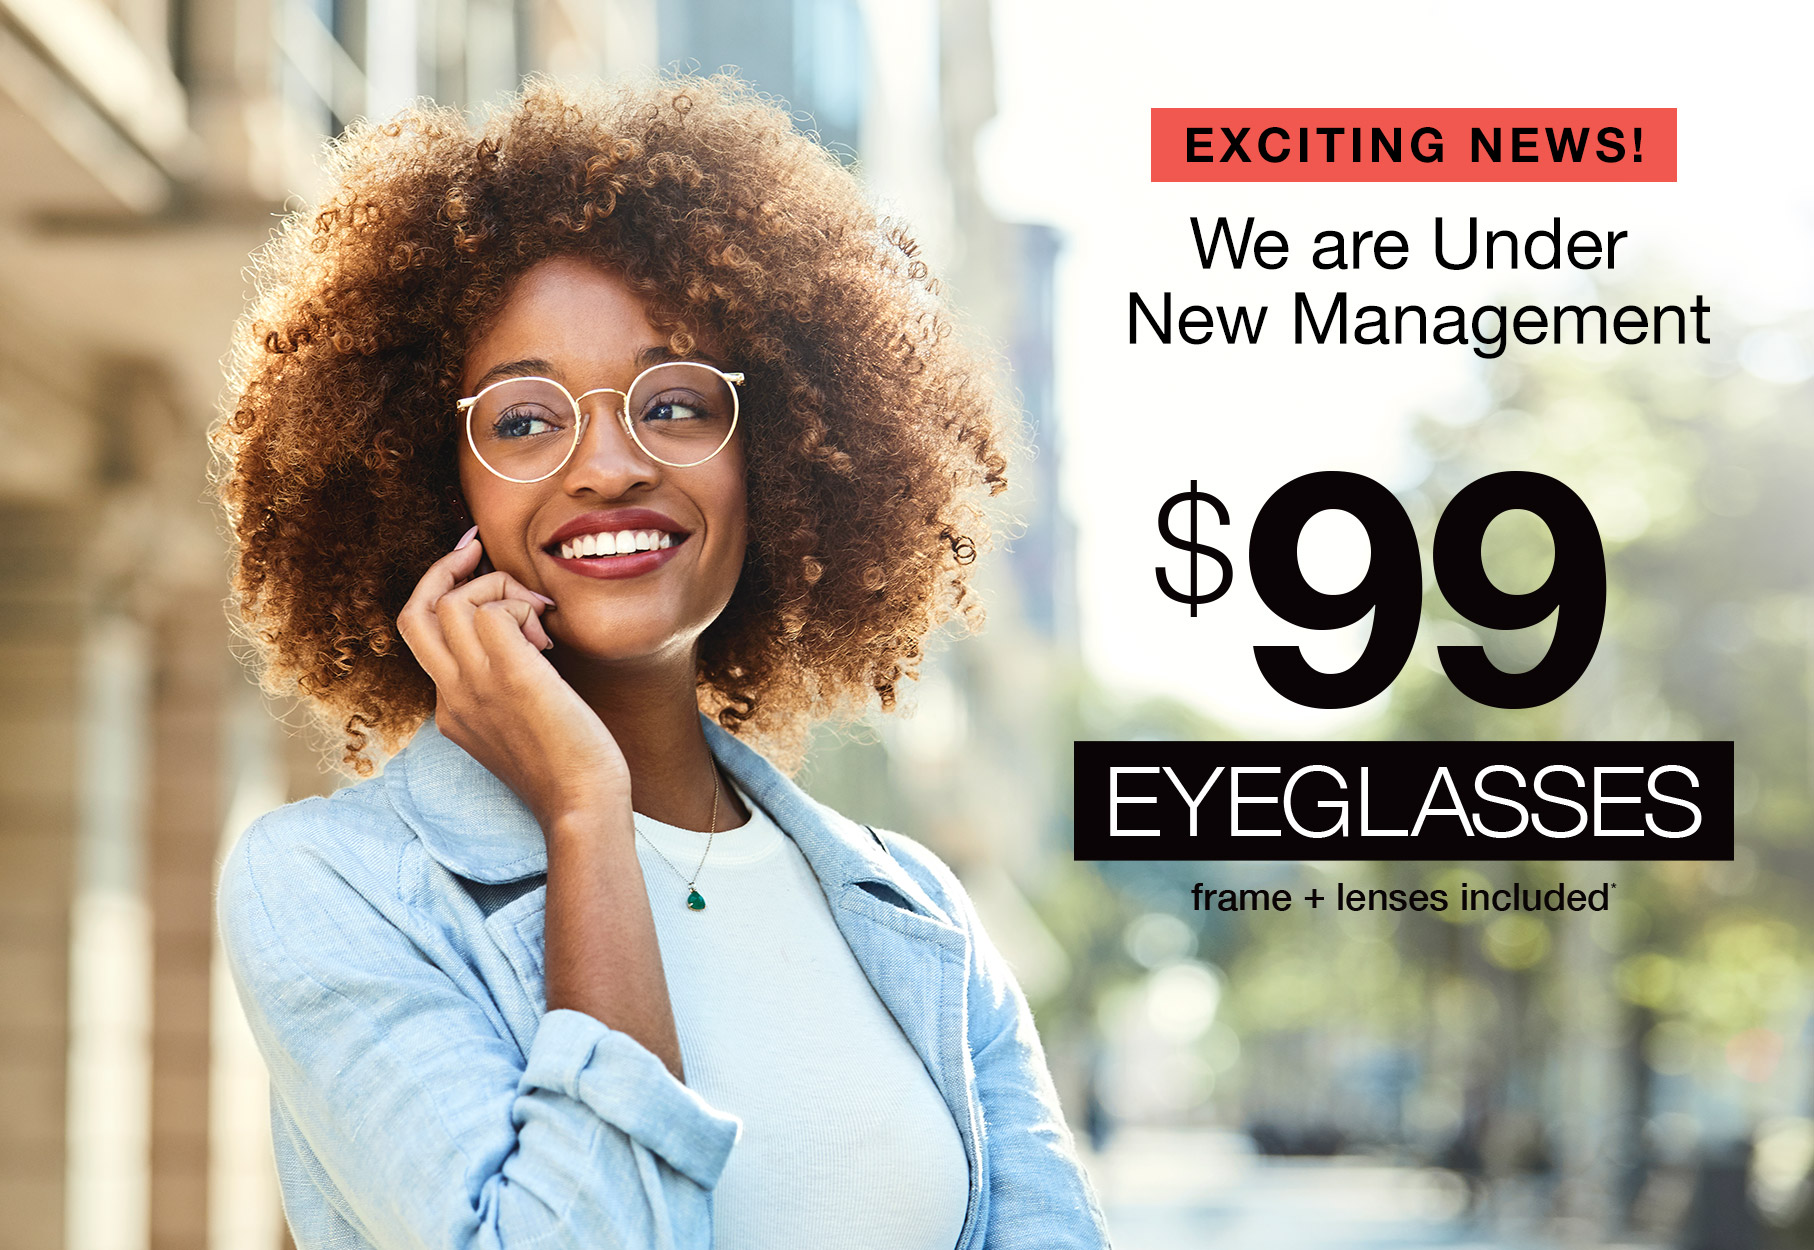 Text: Exciting News! We are under new management. $99 Eyeglasses frame + lenses included* Photo: Smiling woman wearing eyeglasses and holding a cell phone to her ear.